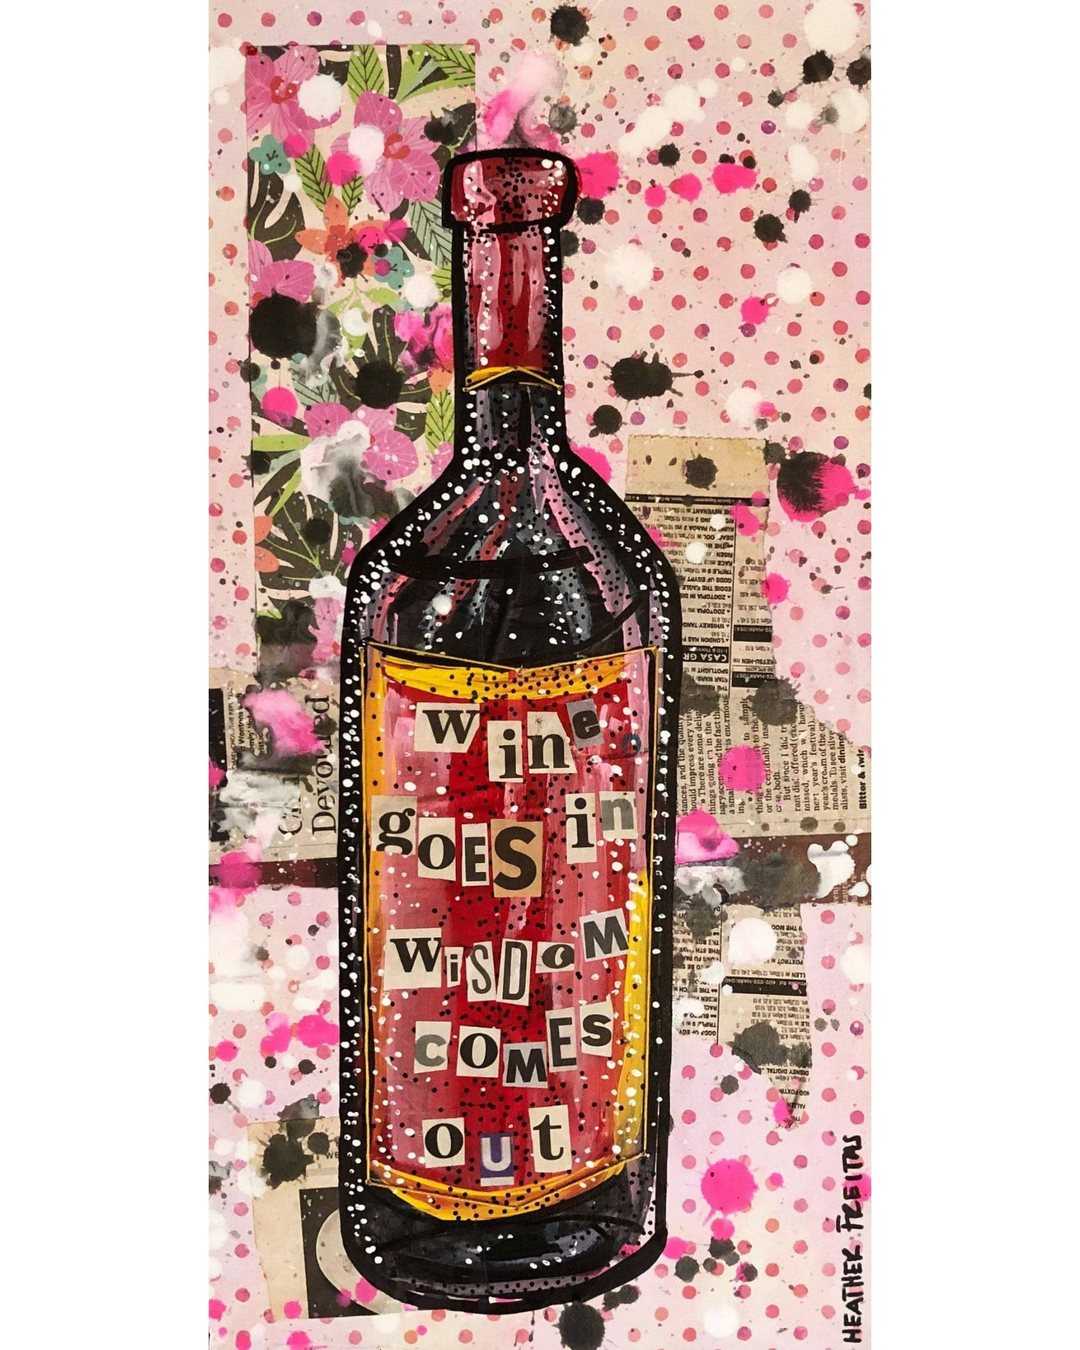 Wine Goes In Wisdom Comes Out - Original pop art wine bottle painting - Heather Freitas 